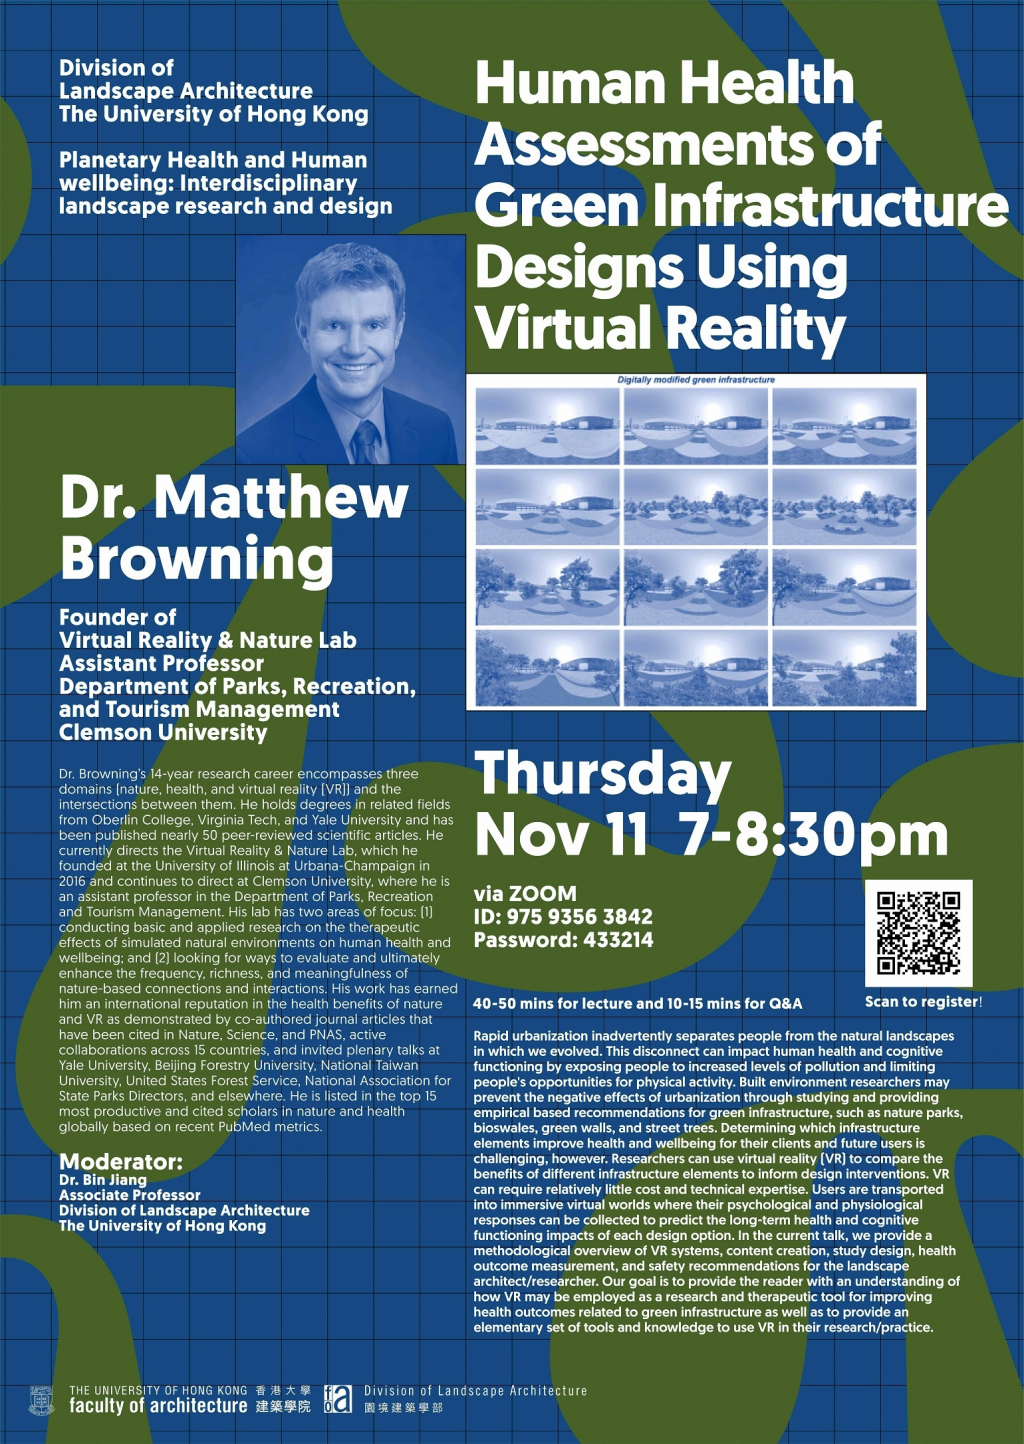 'Human Health Assessments of Green Infrastructure Designs Using Virtual Reality' by Dr. Matthew Browning | 11 Nov, 7-8:30pm | Zoom